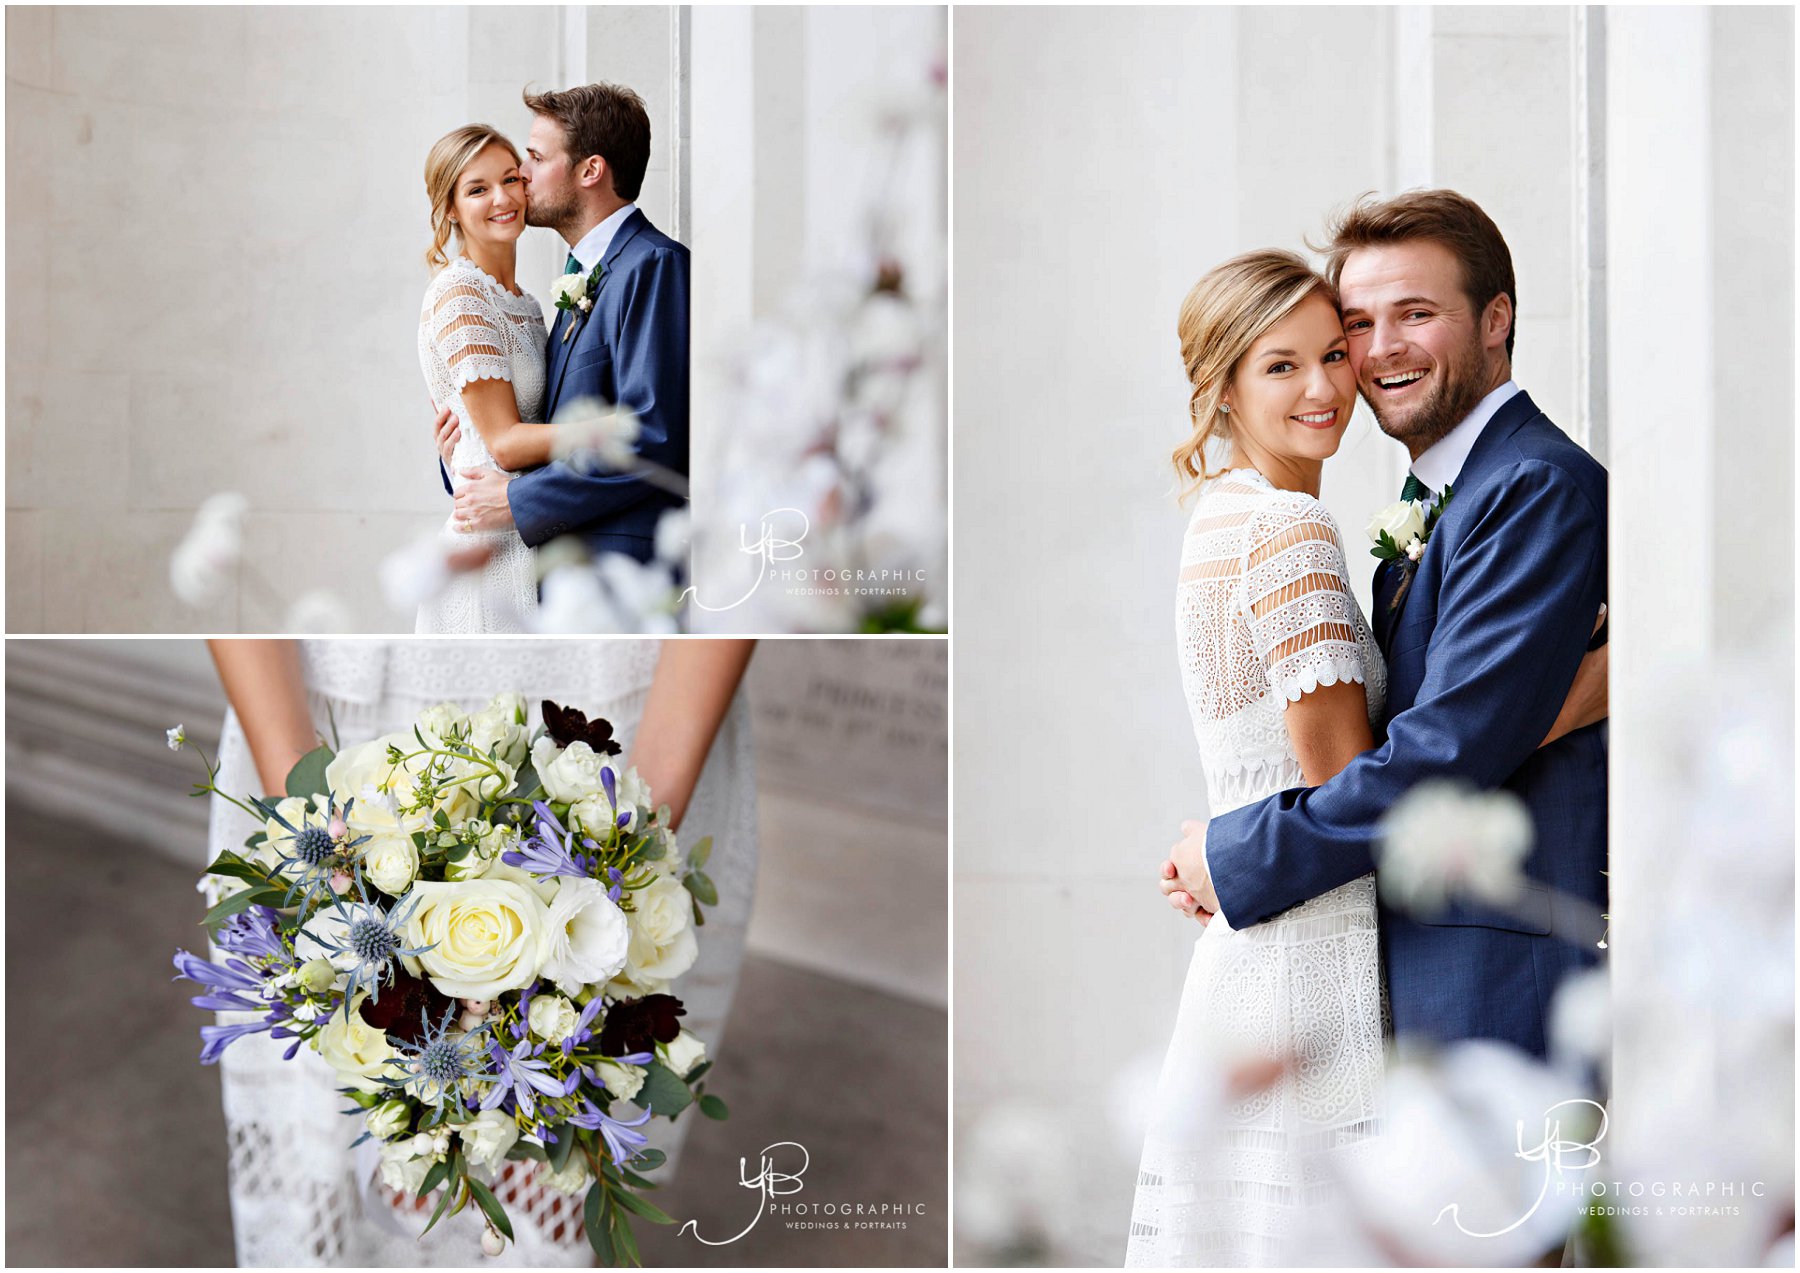 Bride and Groom Portraits at The Old Marylebone Town Hall by YBPHOTOGRAPHIC